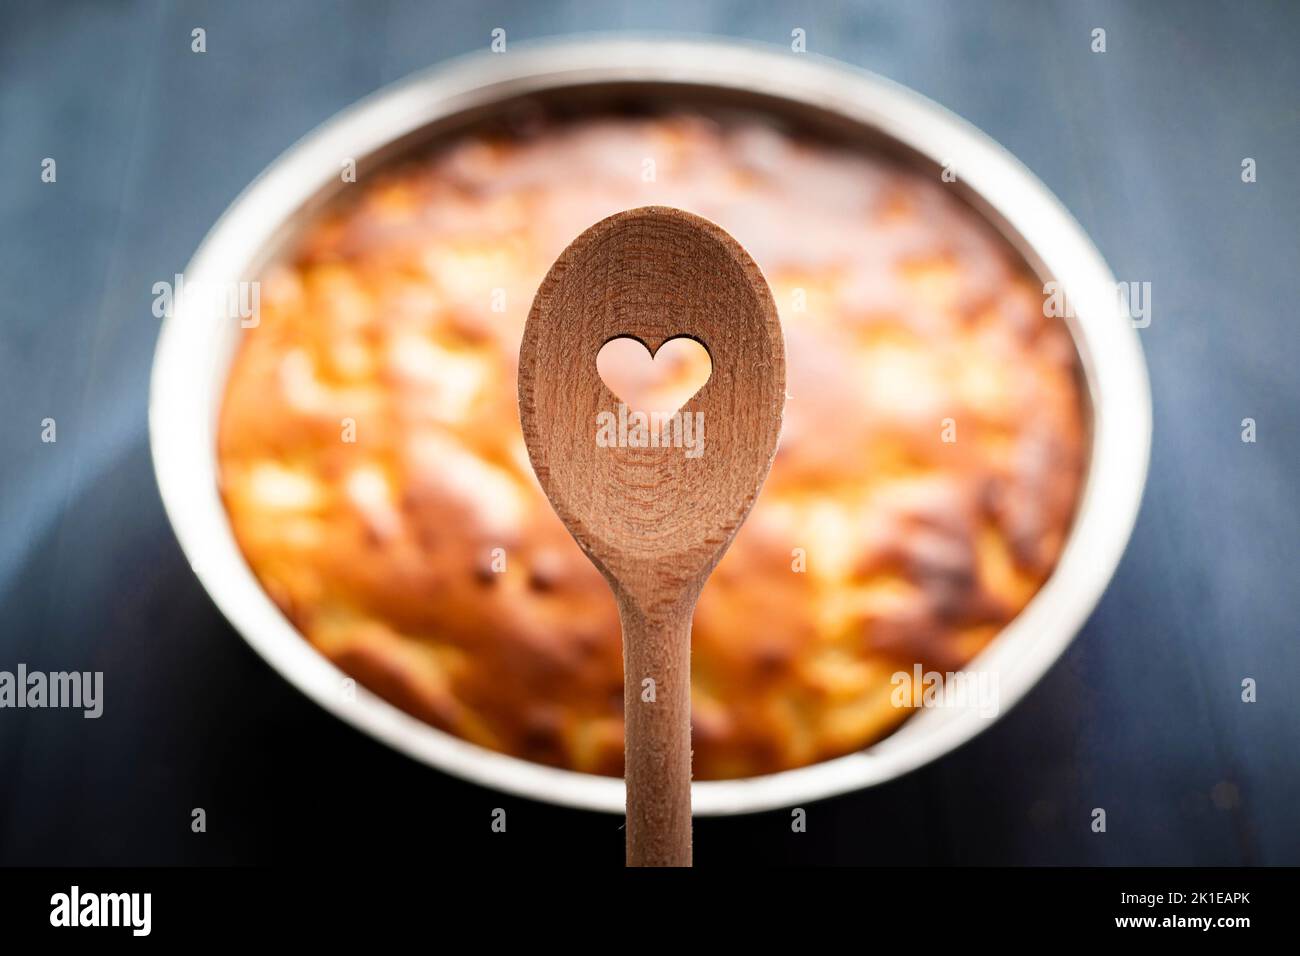 Wooden spoon with heart shaped hole, and pie in the background on blue table. Baked with love concept. Stock Photo